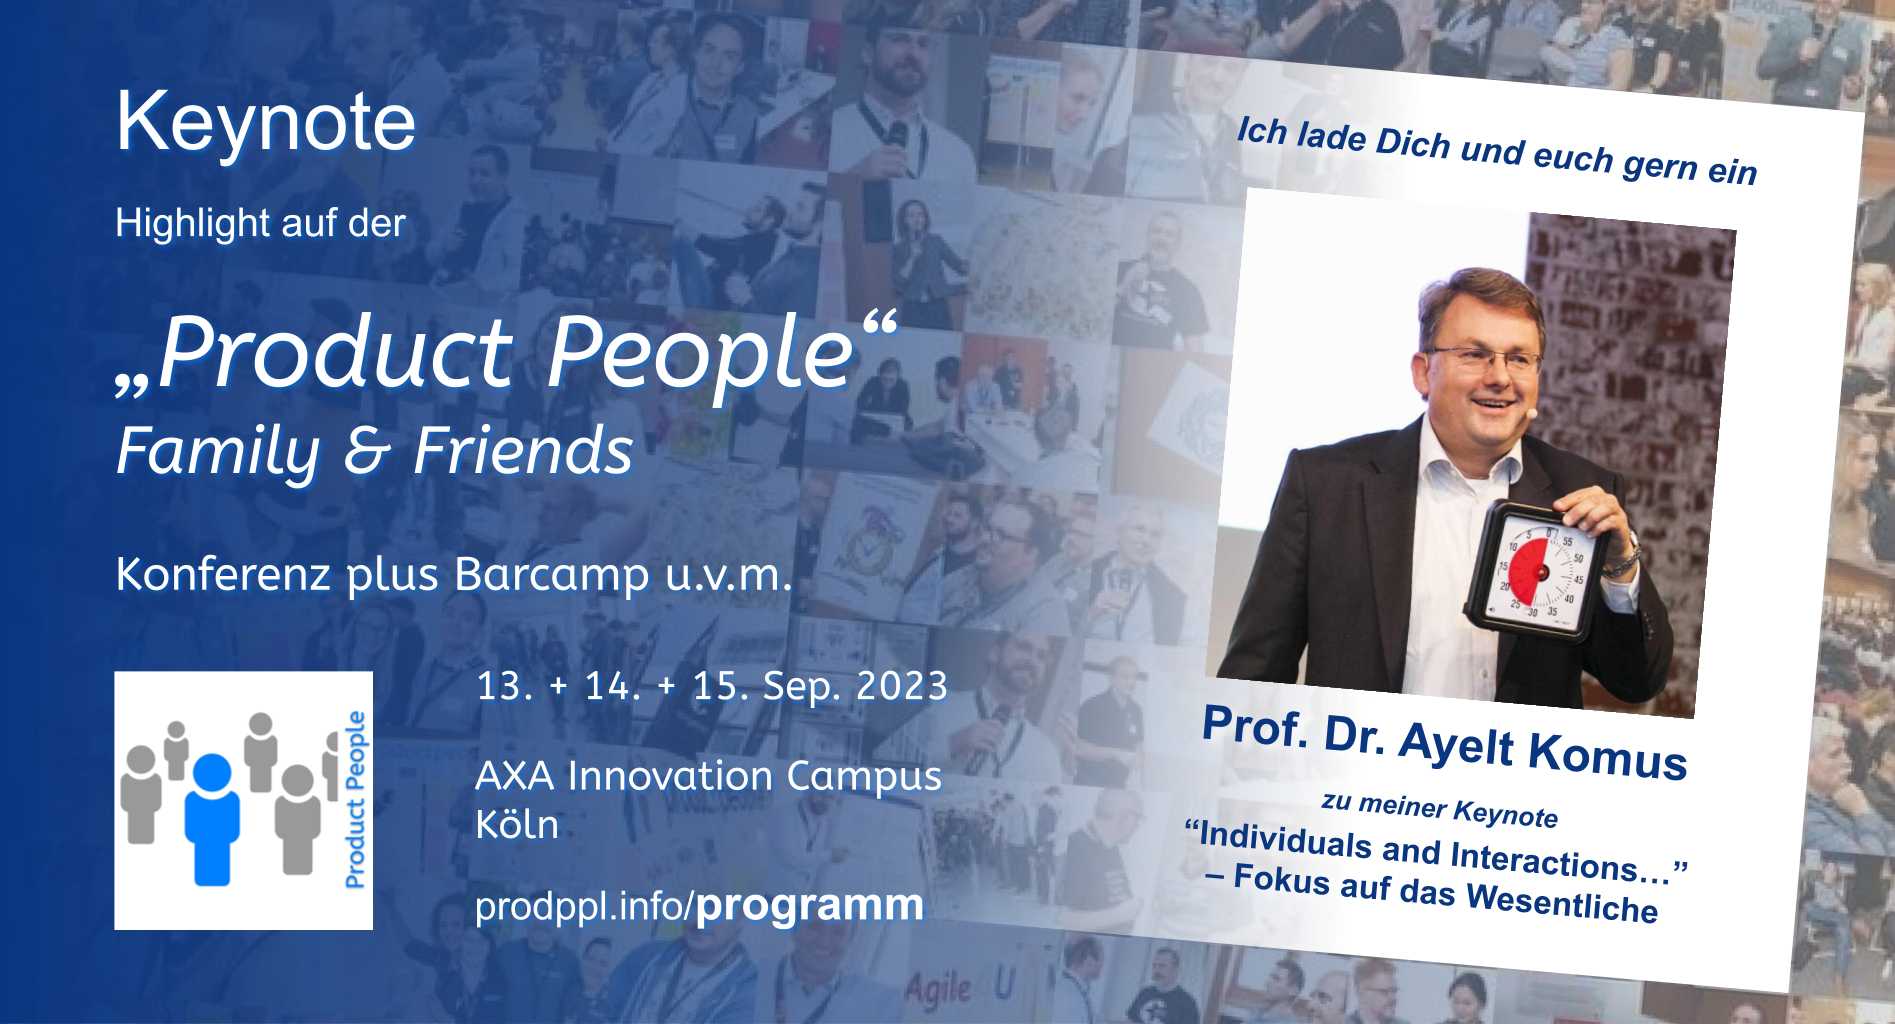 Keynote "Individuals and Interaction" - Prof. Dr. Ayelt Komus - "Product People - Family & Friends" - Konferenz plus Barcamp 2023